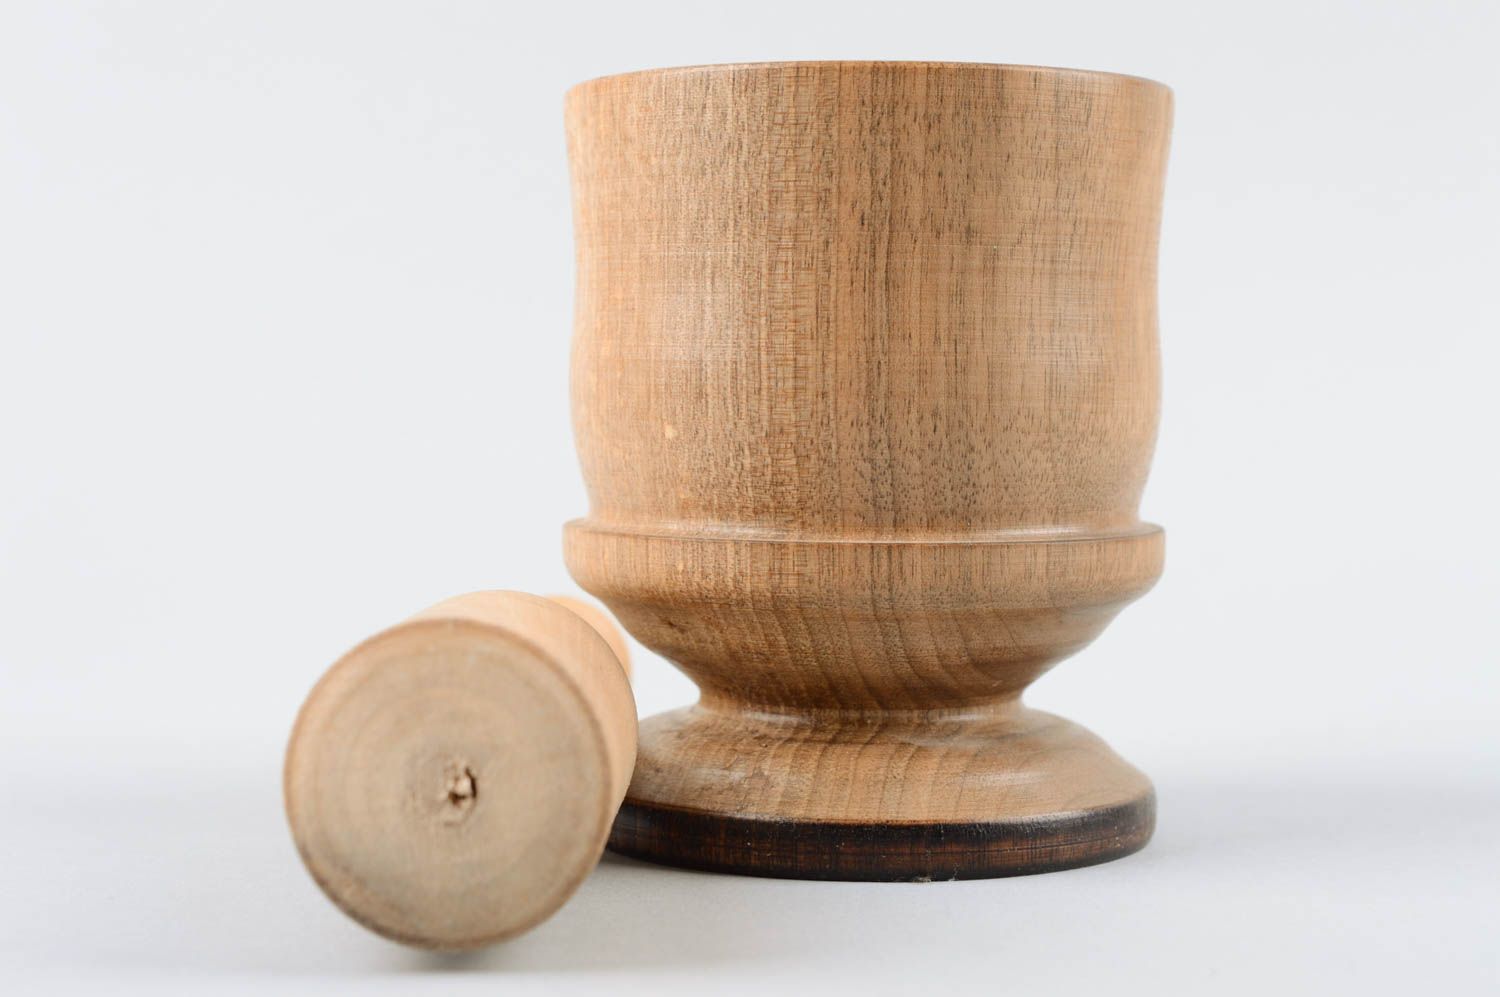 Handmade organic mortar and pestle wooden hand spice grinder wooden mortar photo 4